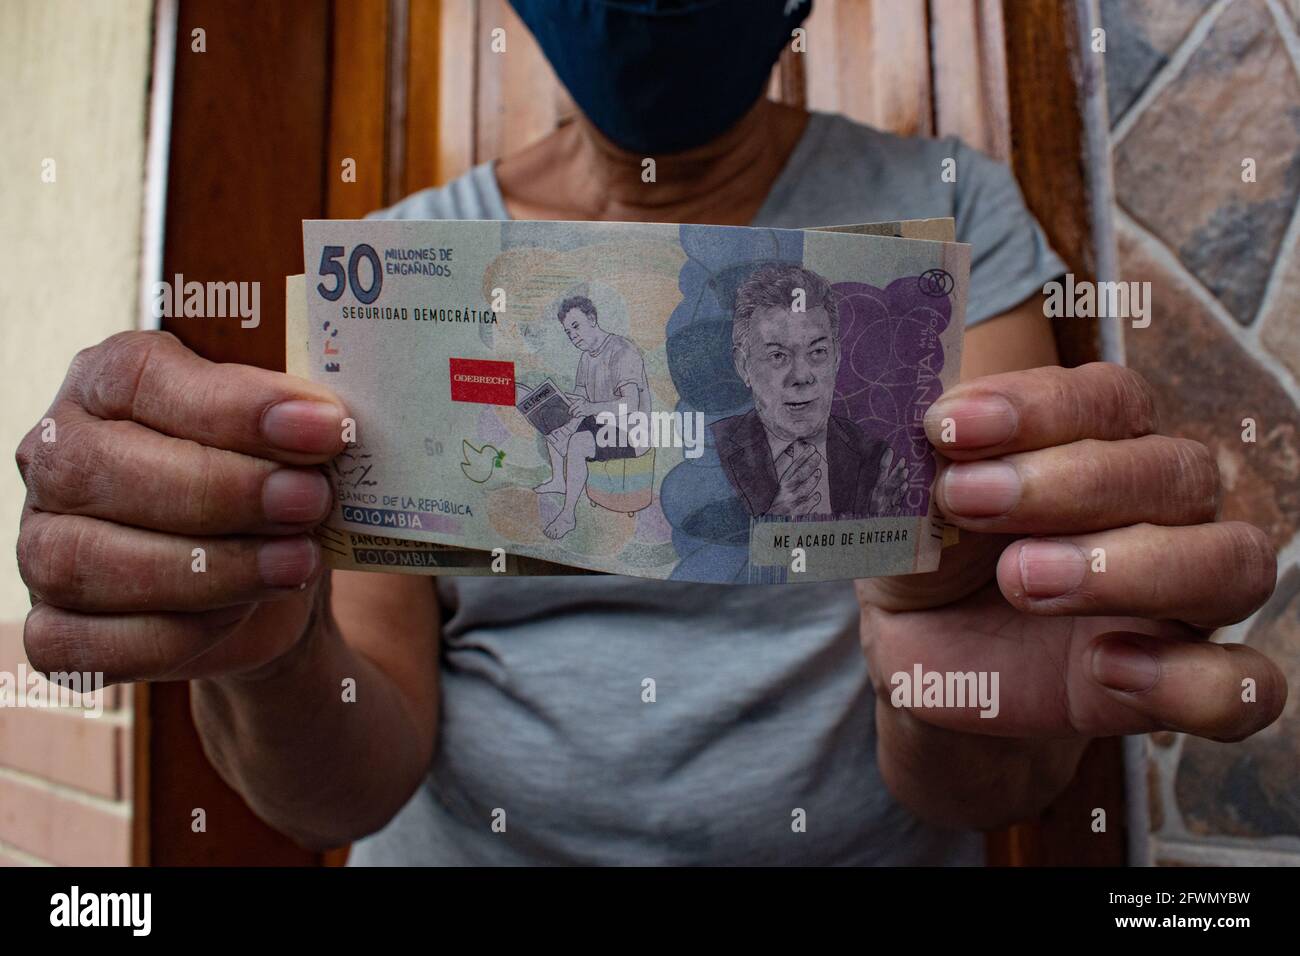 Medellin, Antioquia, Colombia. 22nd May, 2021. A demonstrator holds a fake fifty thousand pesos note with the image of former president Juan Manuel Santos and the logo of ODEBRECHT as clashes and riots evolve in Medellin, Colombia after demonstrators and riot police (ESMAD) during a demonstration that escalated to clashes after security cameras and commerce were affected by the protest. In Medellin, Antioquia, Colombia on 22, 2021. Credit: Miyer Juana/LongVisual/ZUMA Wire/Alamy Live News Stock Photo